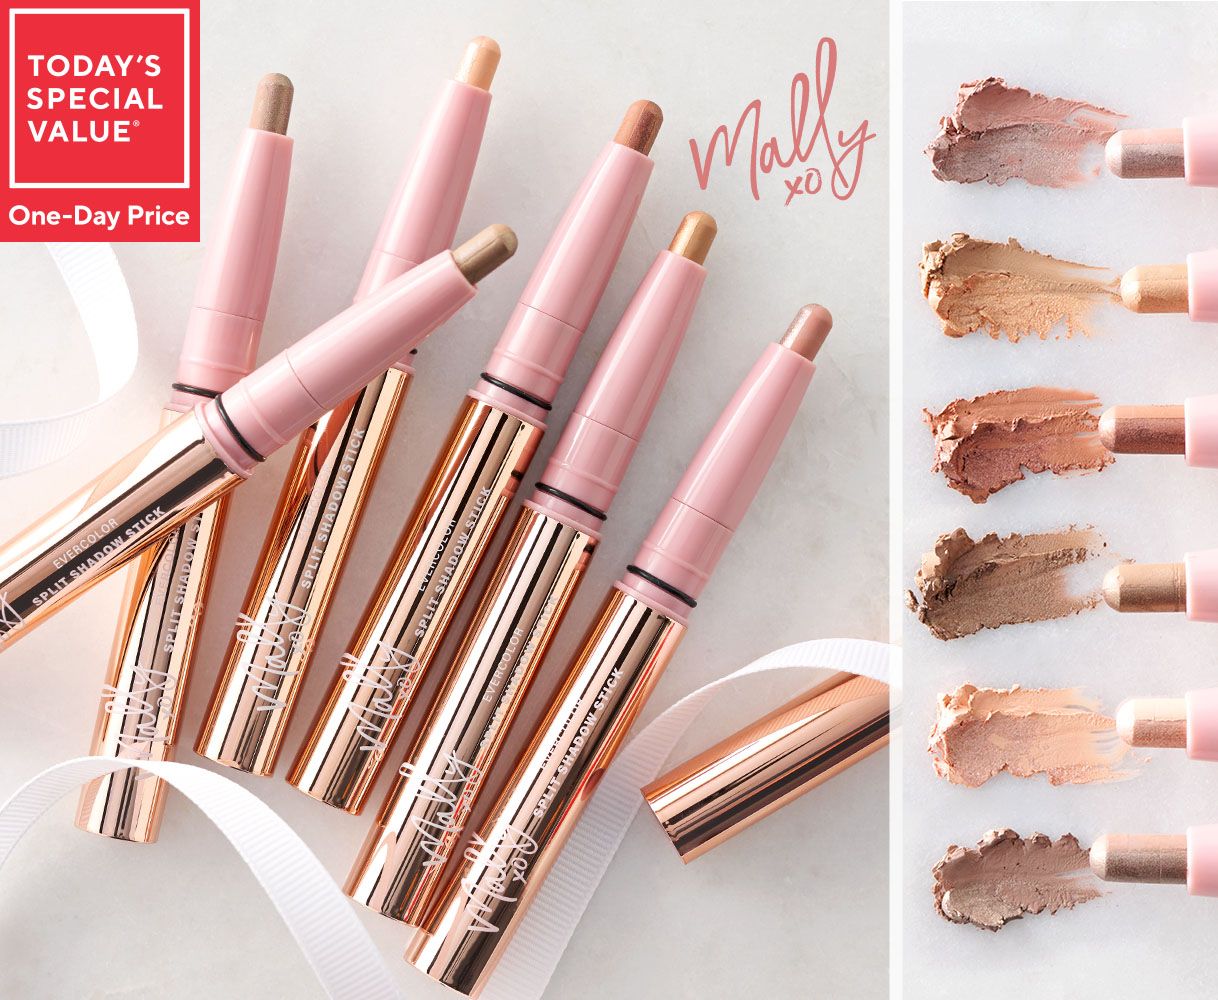 Today's Special Value® One-Day Price: Mally Evercolor 2-in-1 Shadow Stick 6-Piece Collection